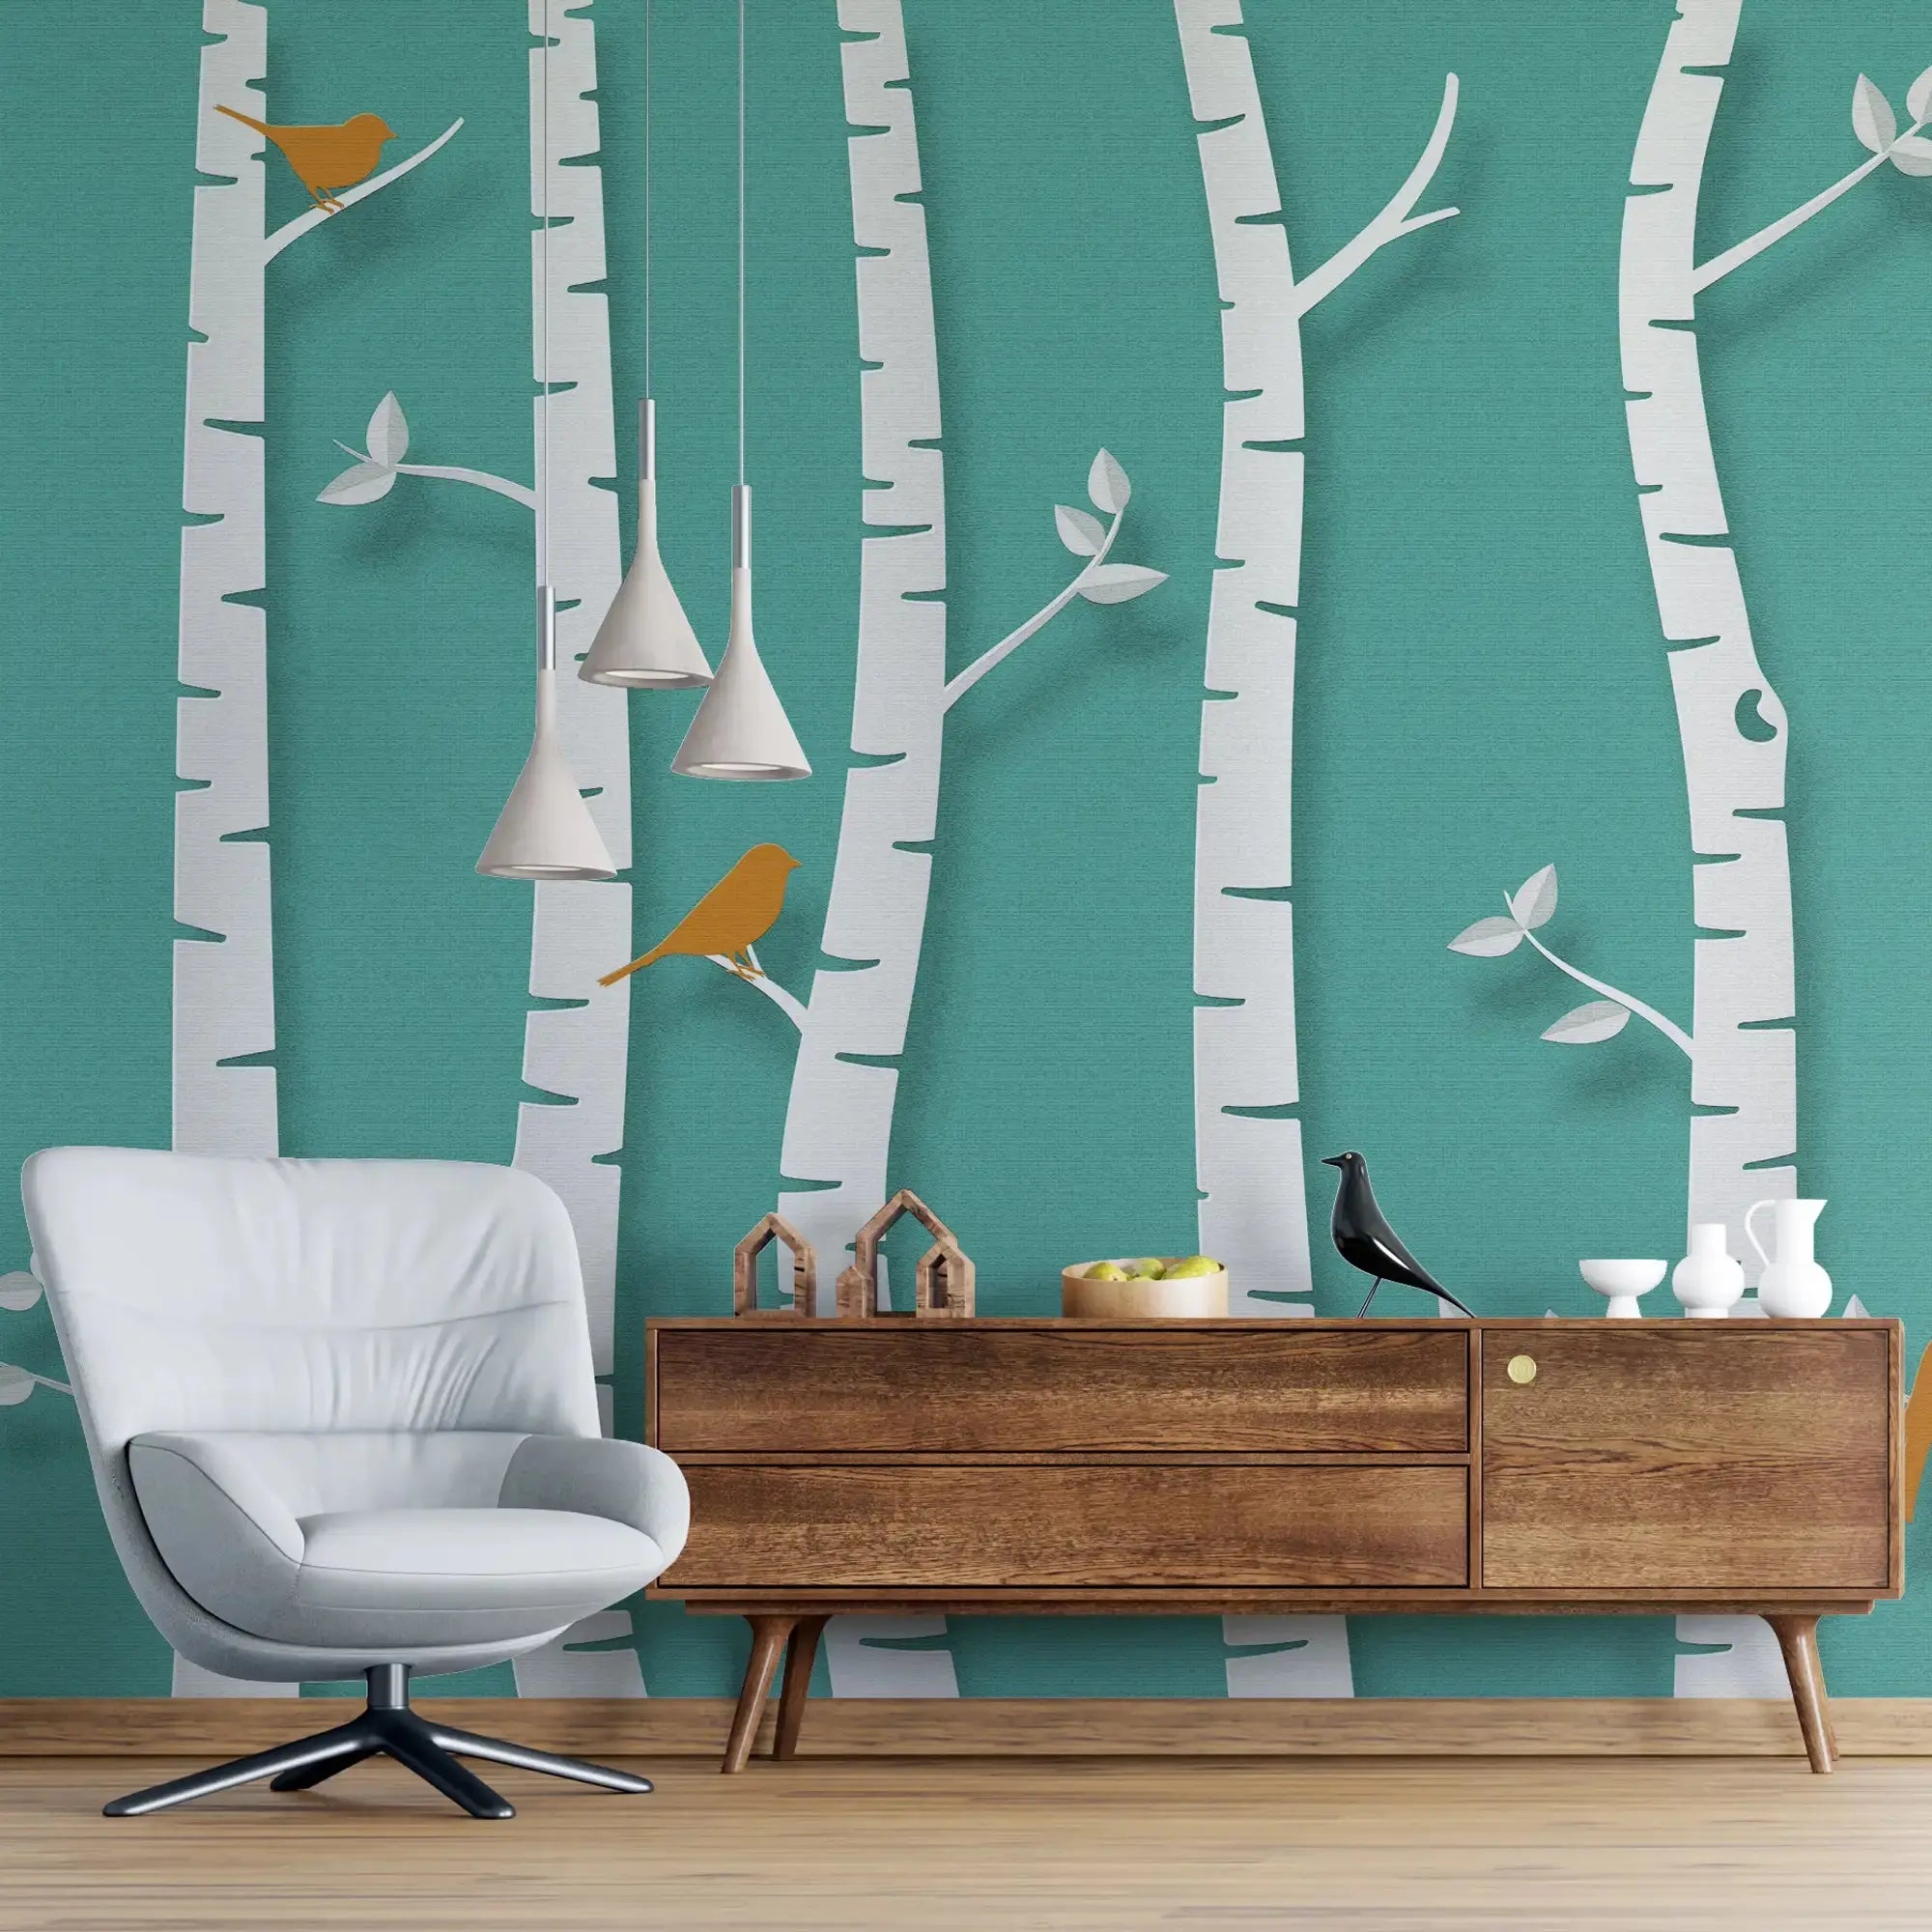 3134-A / Birch Tree Forest Wallpaper - Nature Theme Wall Mural, Easy Peel and Stick Installation for Modern Home Decor - Artevella